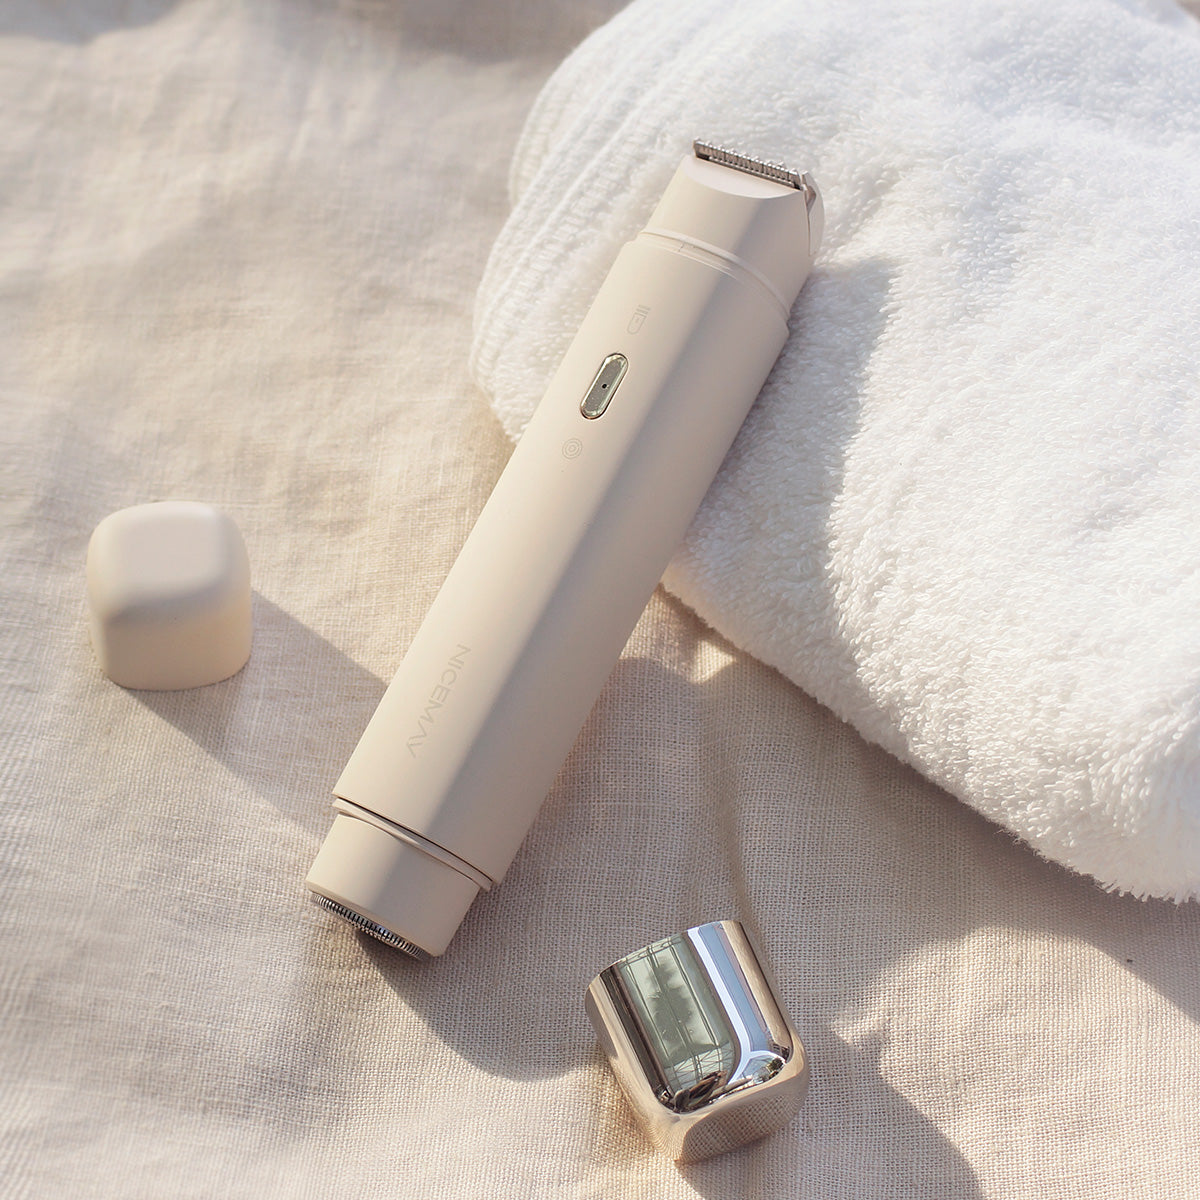 Lisscode +duo Body Shaver